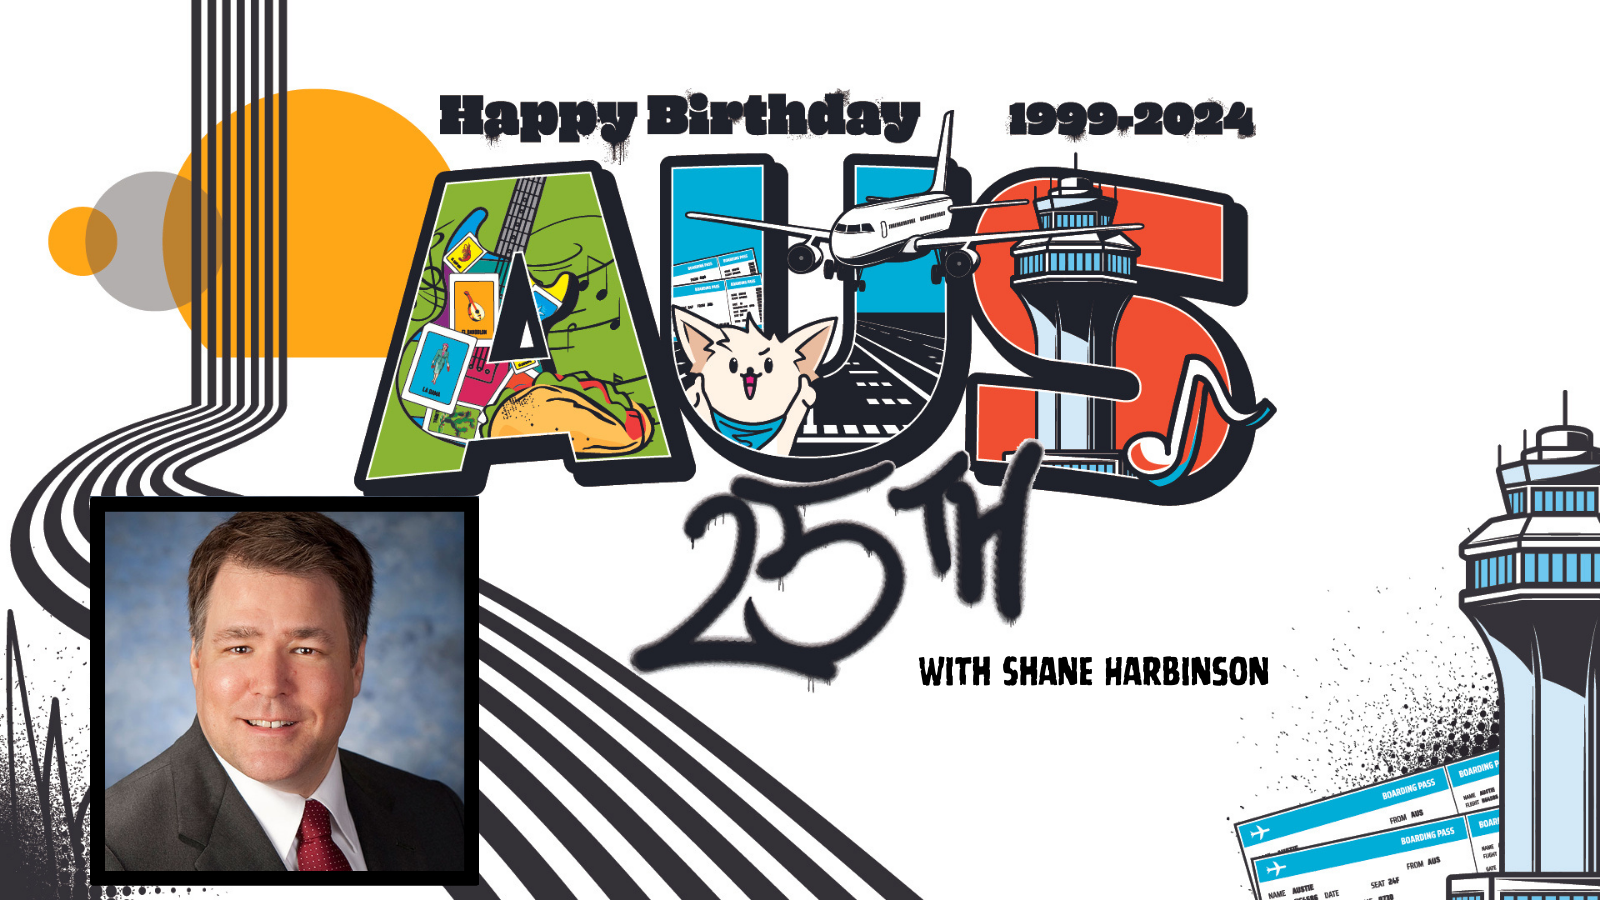 Image of AUS 25th Anniversary graphic with a picture of Shane Harbinson.